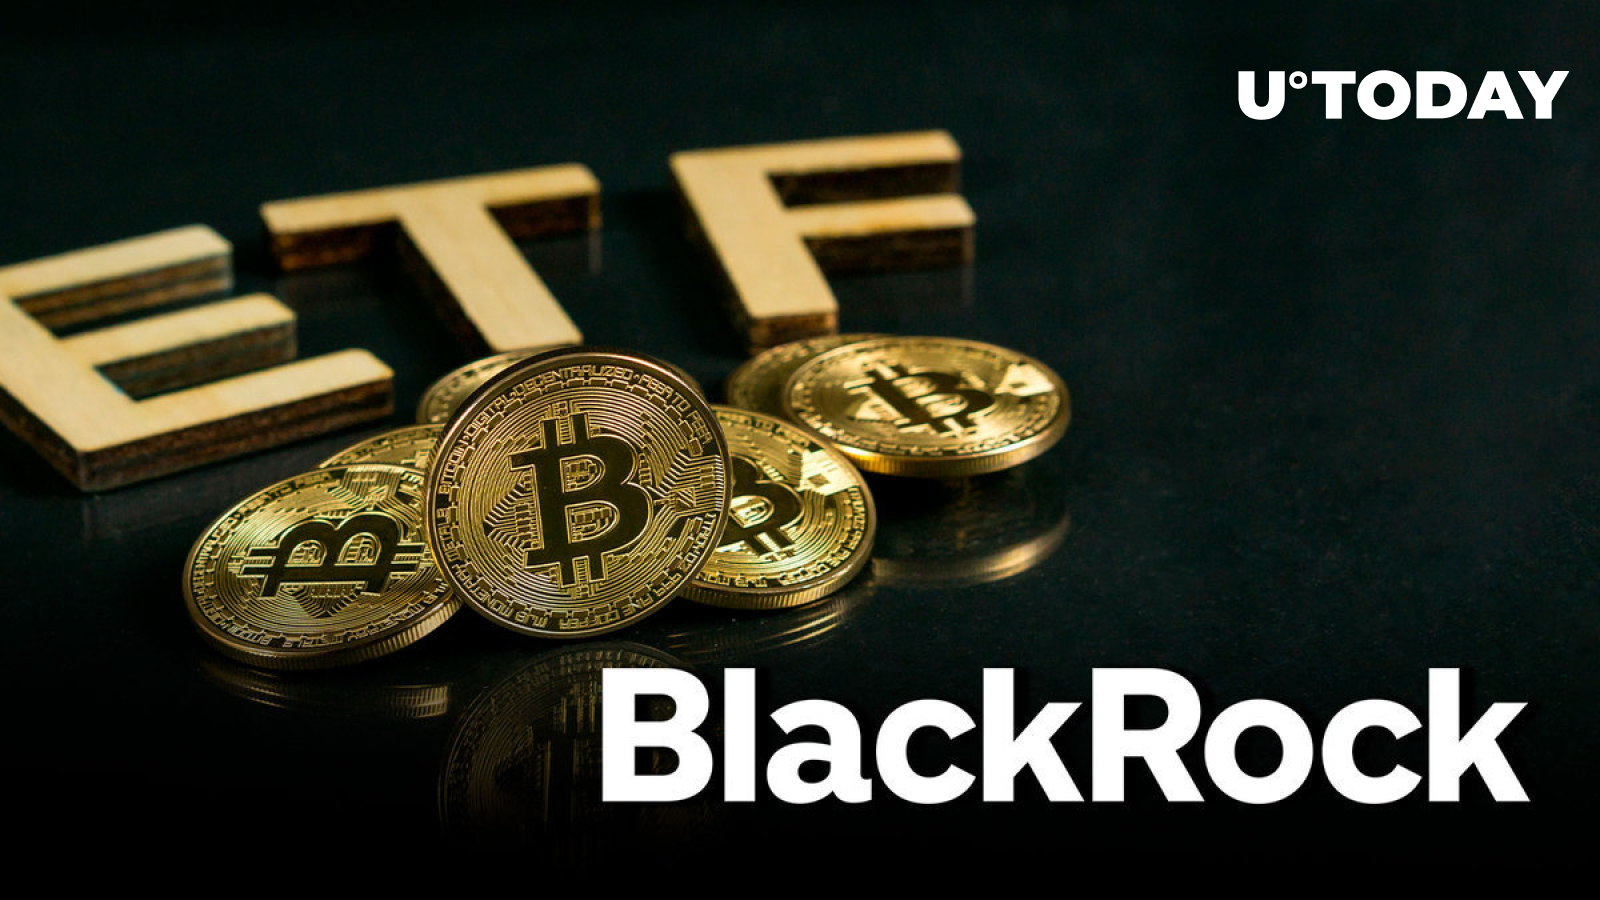 BlackRock’s Bitcoin ETF IBIT Records First Millions in Volume, But There May Be a Catch